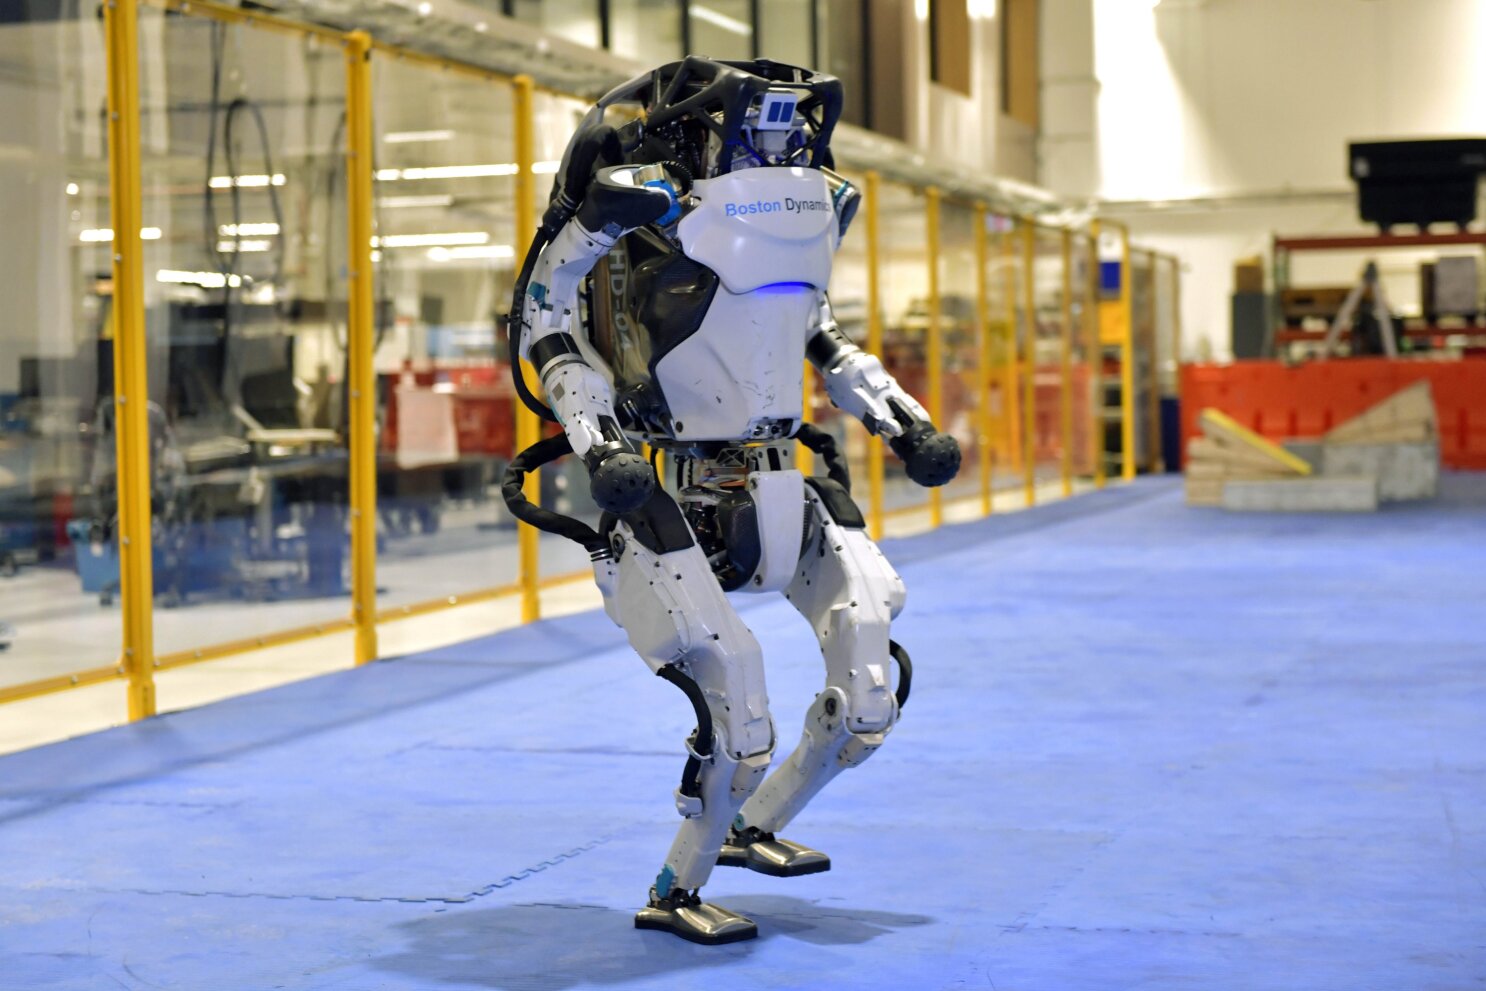 Behind those dancing robots, scientists to bust move | News